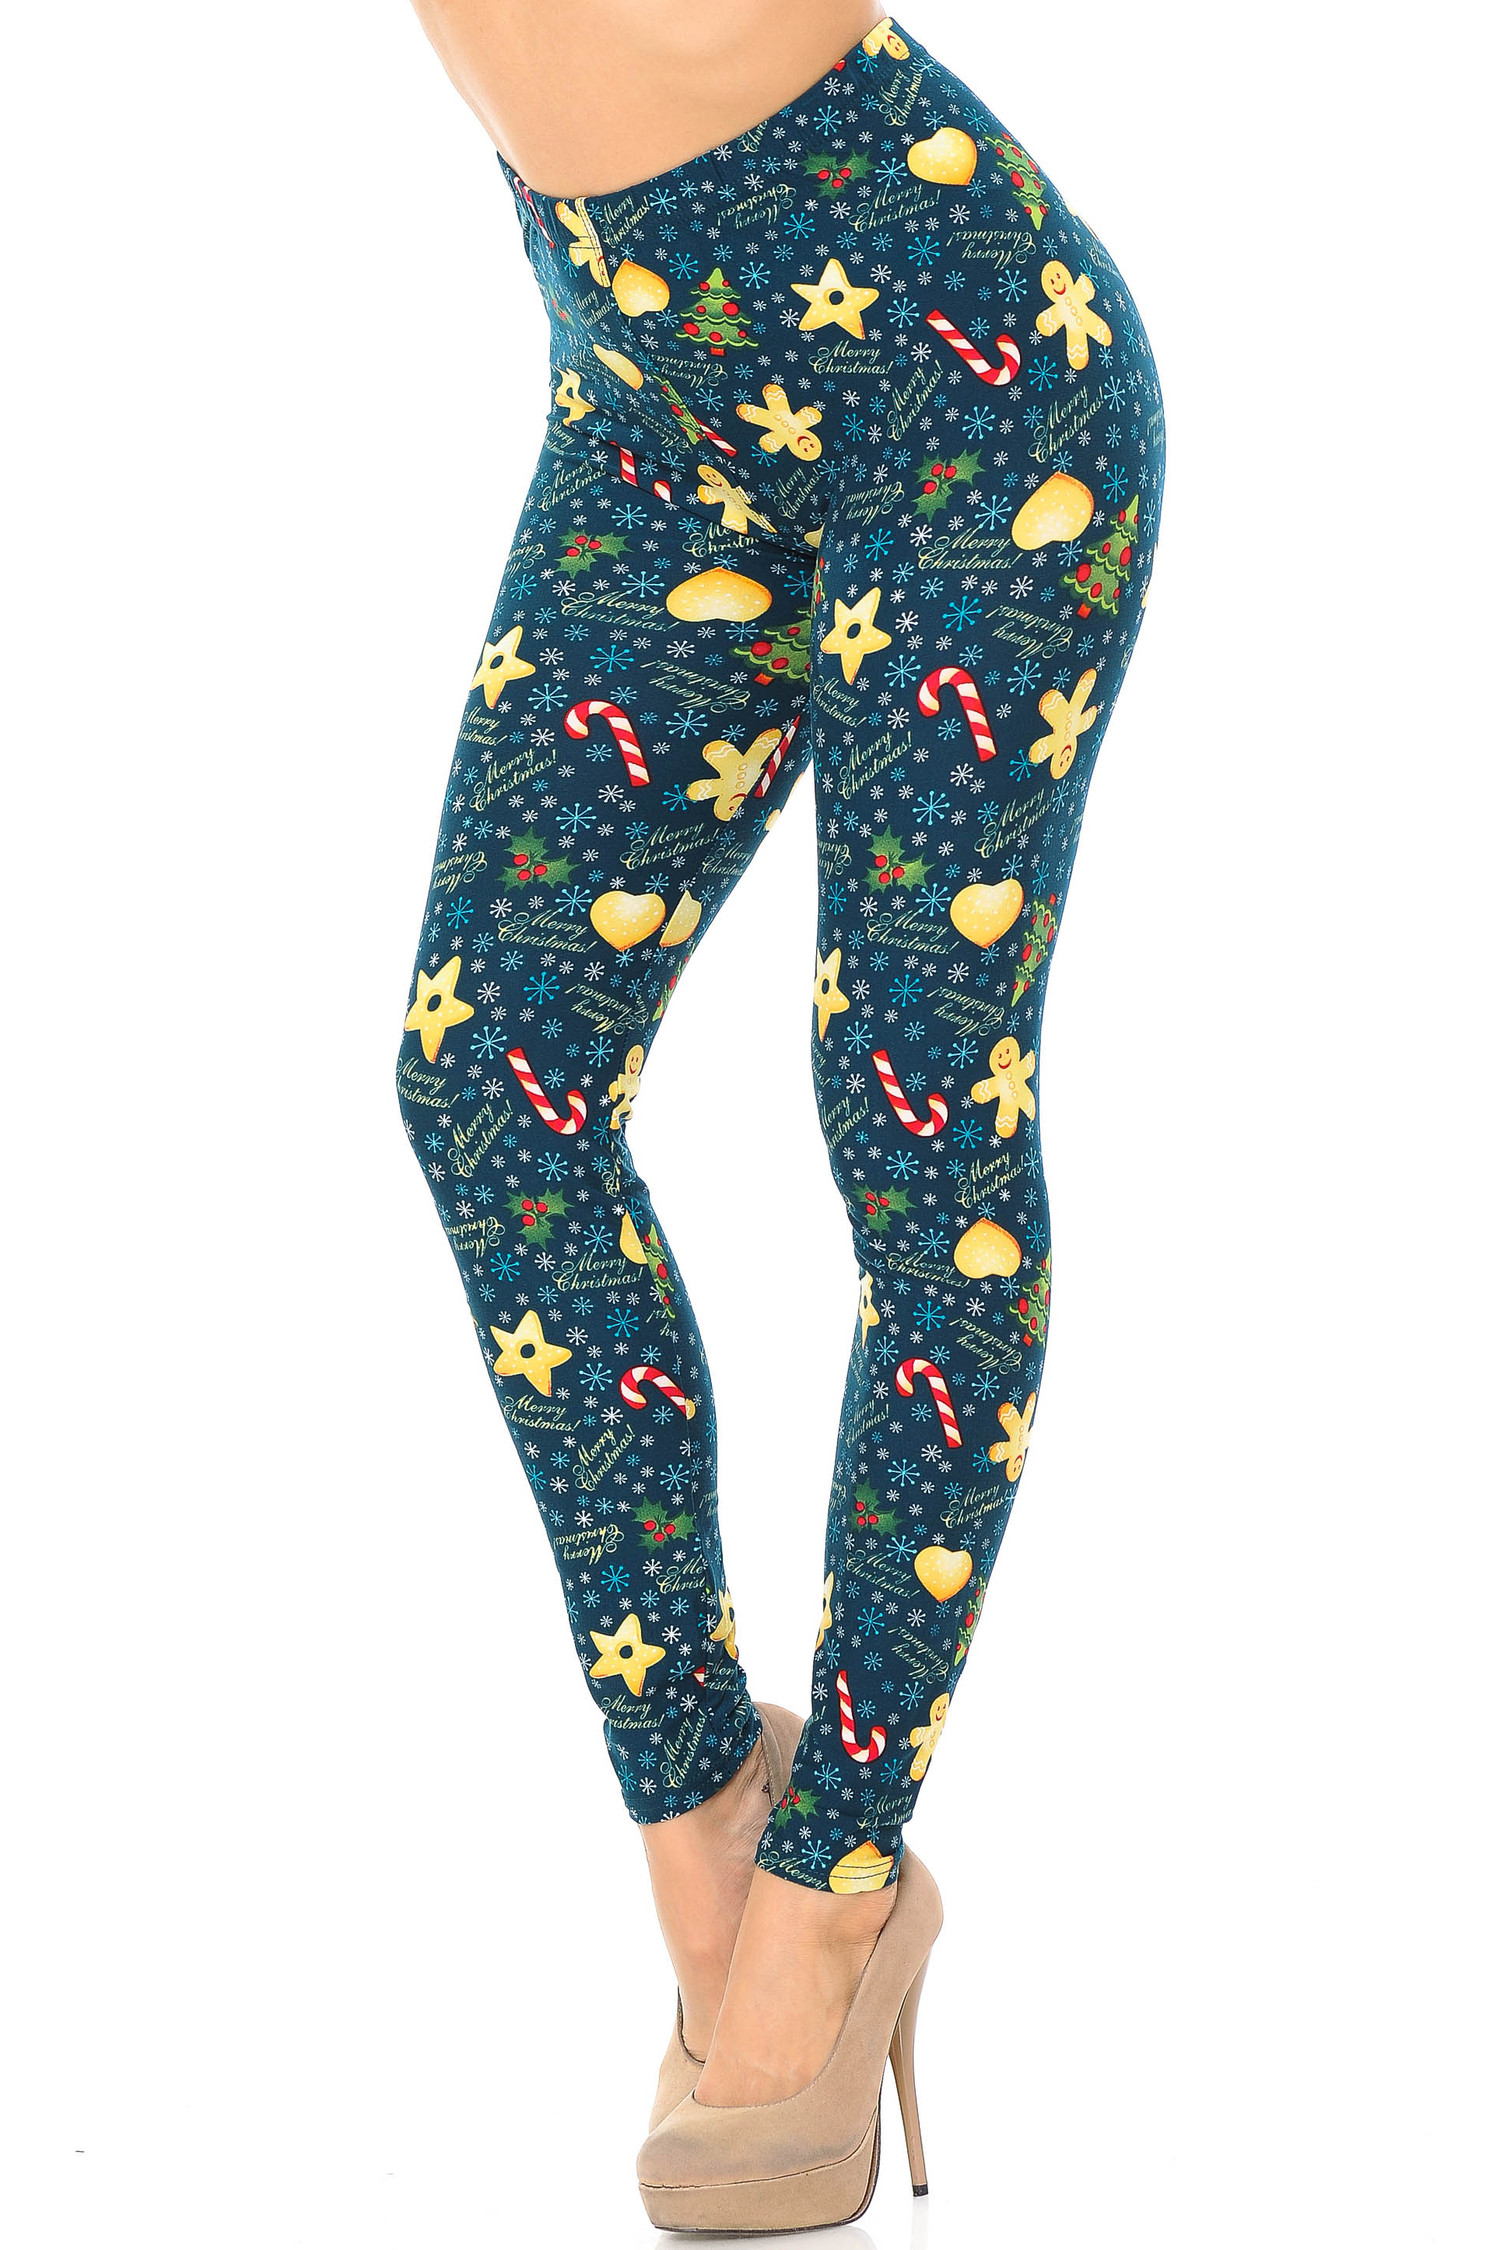 Buttery Soft A Very Merry Christmas Extra Plus Size Leggings - 3X-5X